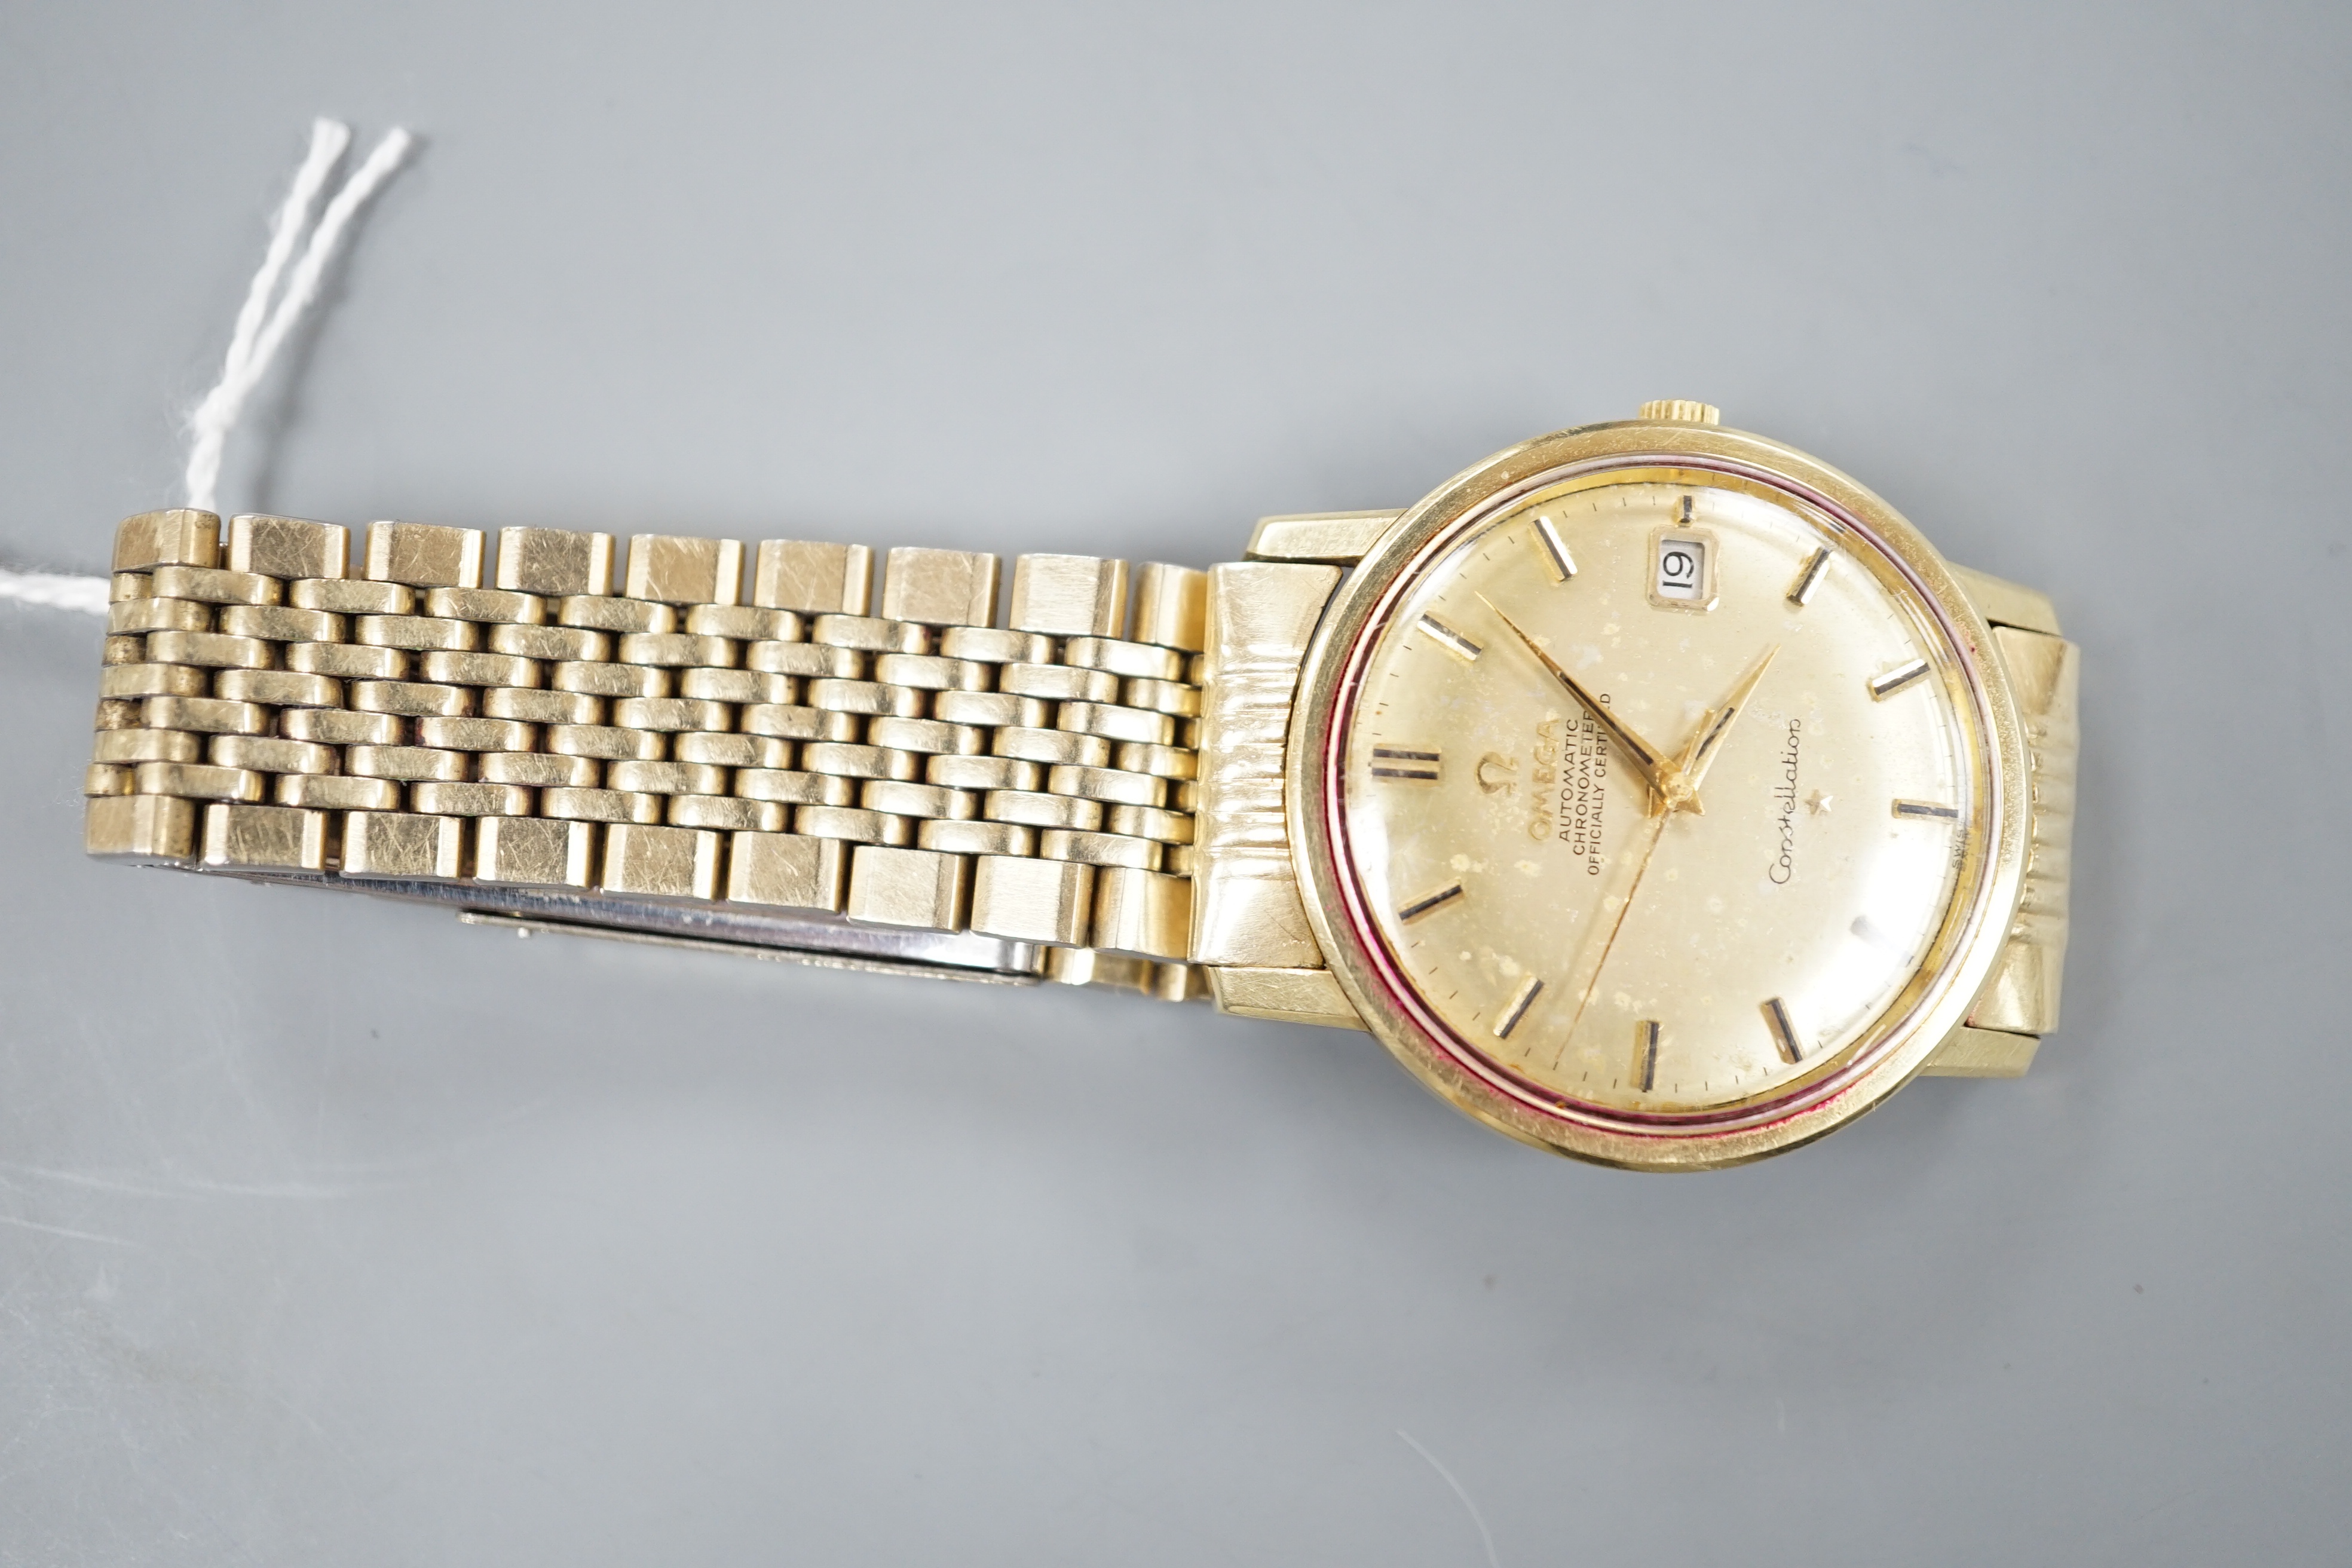 A gentleman's steel and gold plated Omega constellation automatic wrist watch, on an Omega gold plated bracelet.